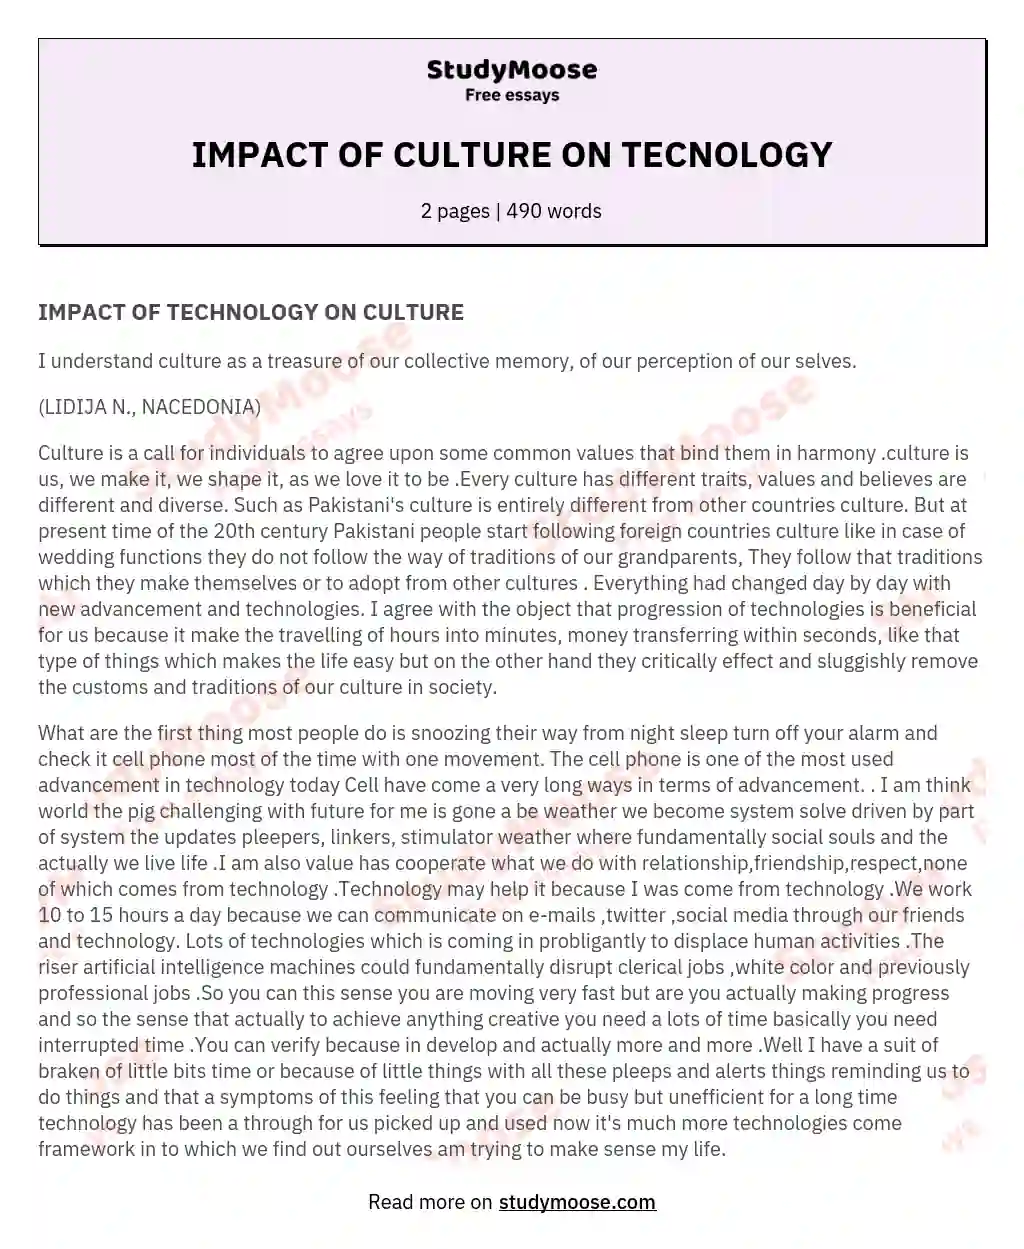 IMPACT OF CULTURE ON TECNOLOGY essay